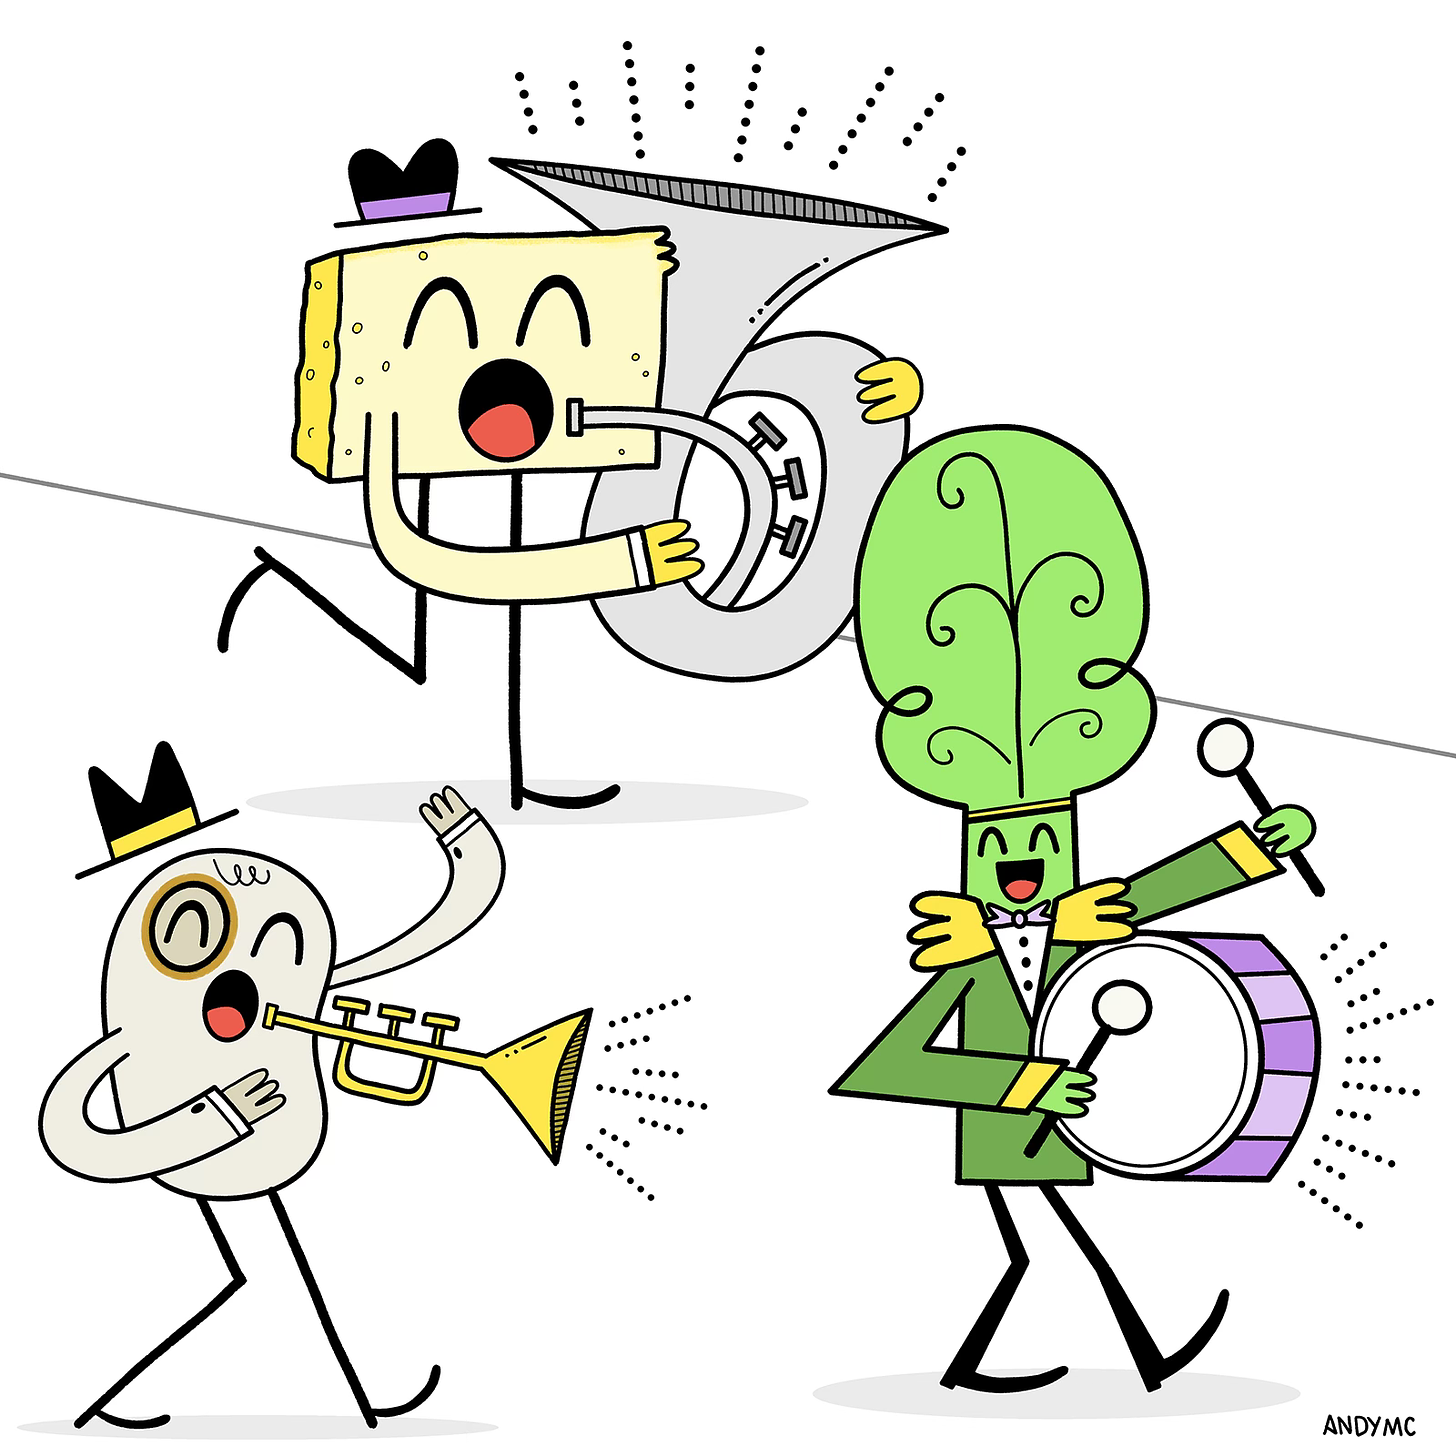 An illustration of a black eye pea, cornbread, and a collard green playing instruments in a parade.